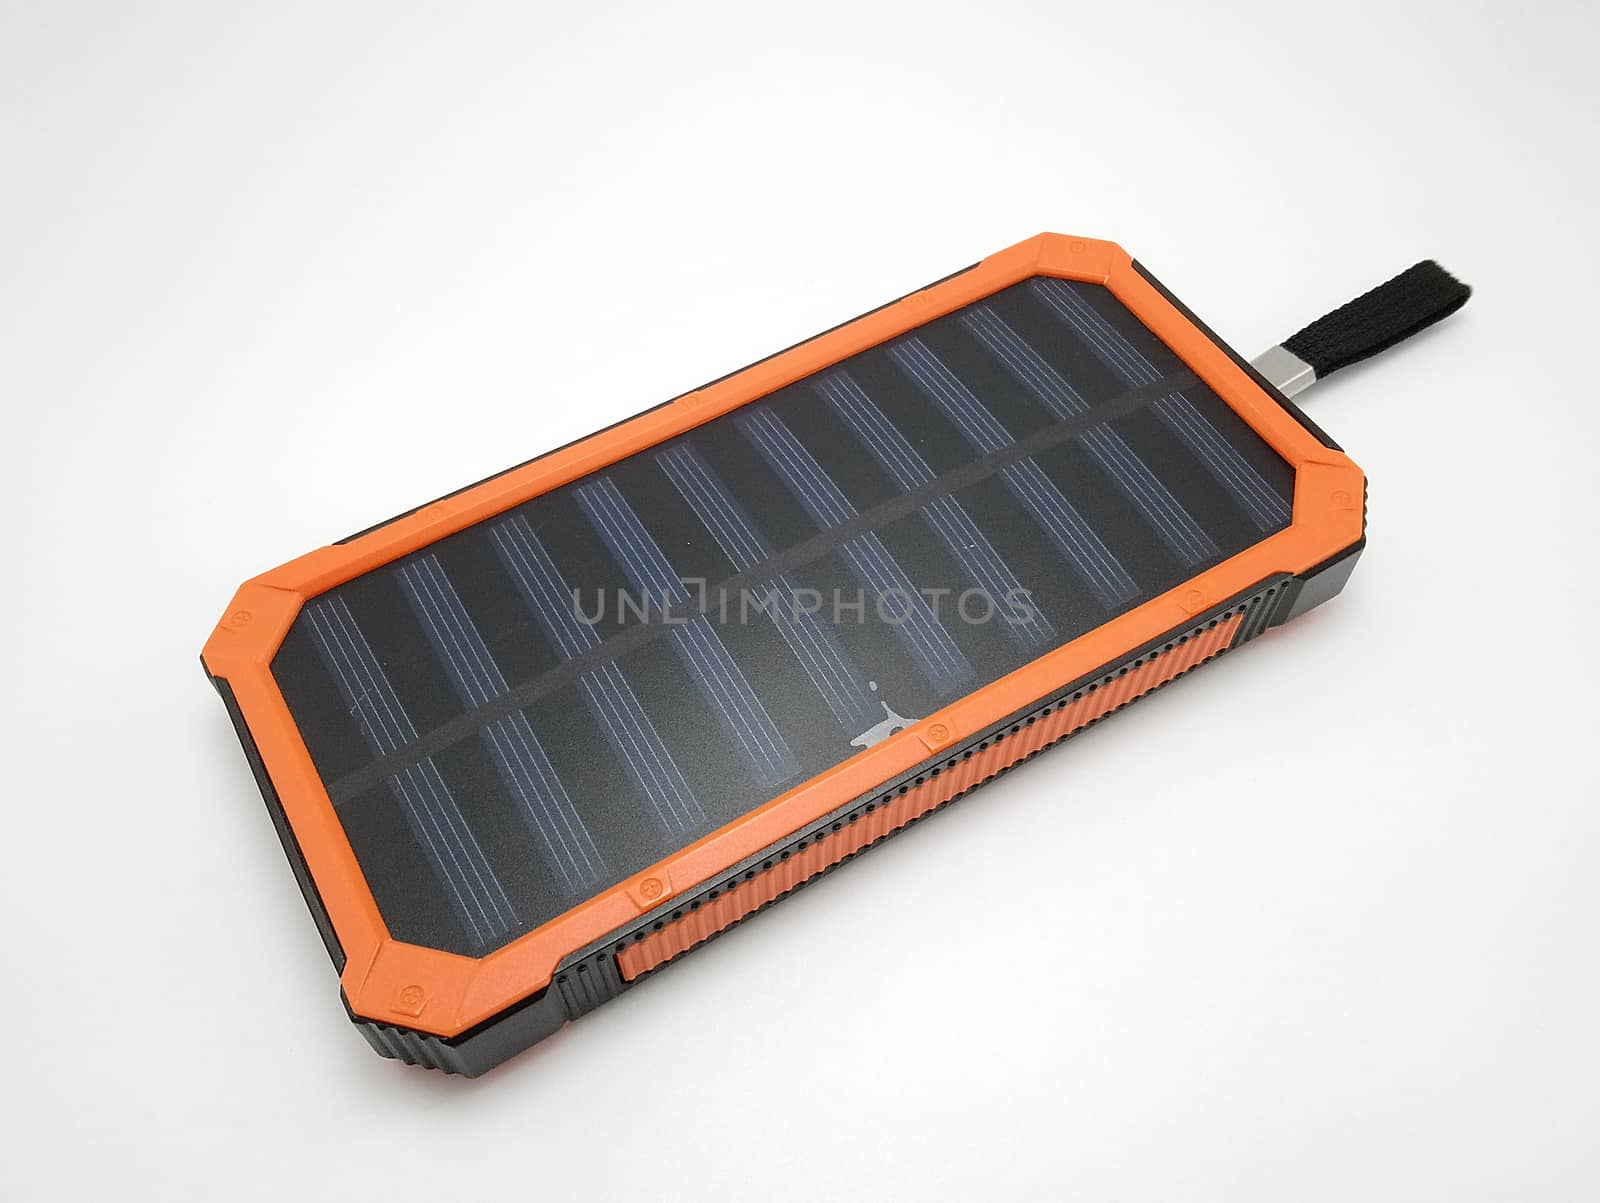 Solar power powerbank charger use to charge low to empty battery of smartphone